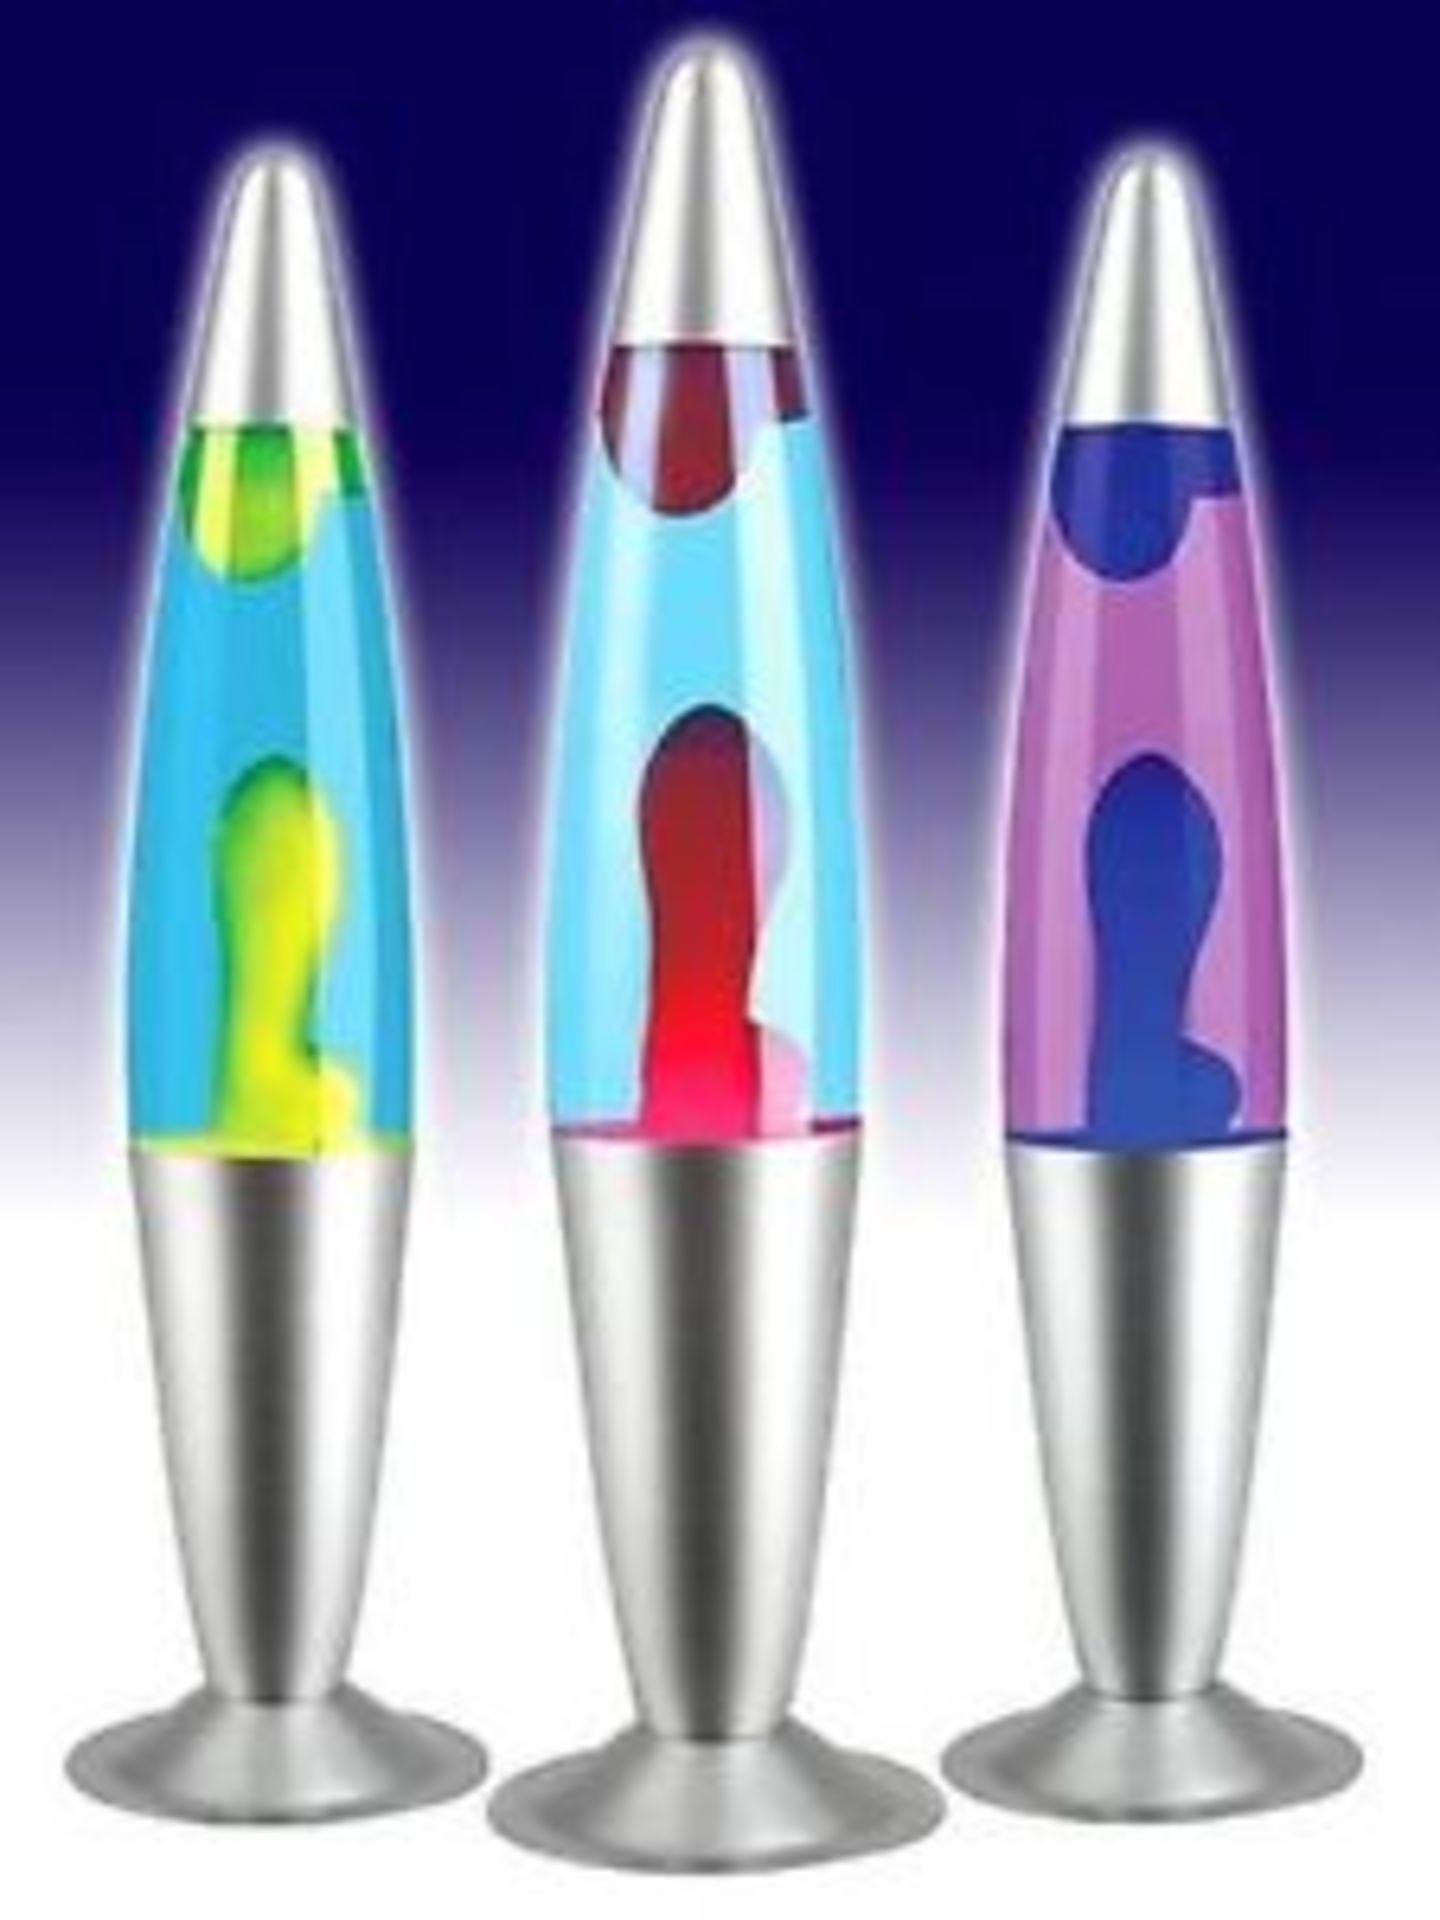 V *TRADE QTY* Brand New Bullet Shaped Luna Lava Lamp X 4 YOUR BID PRICE TO BE MULTIPLIED BY FOUR